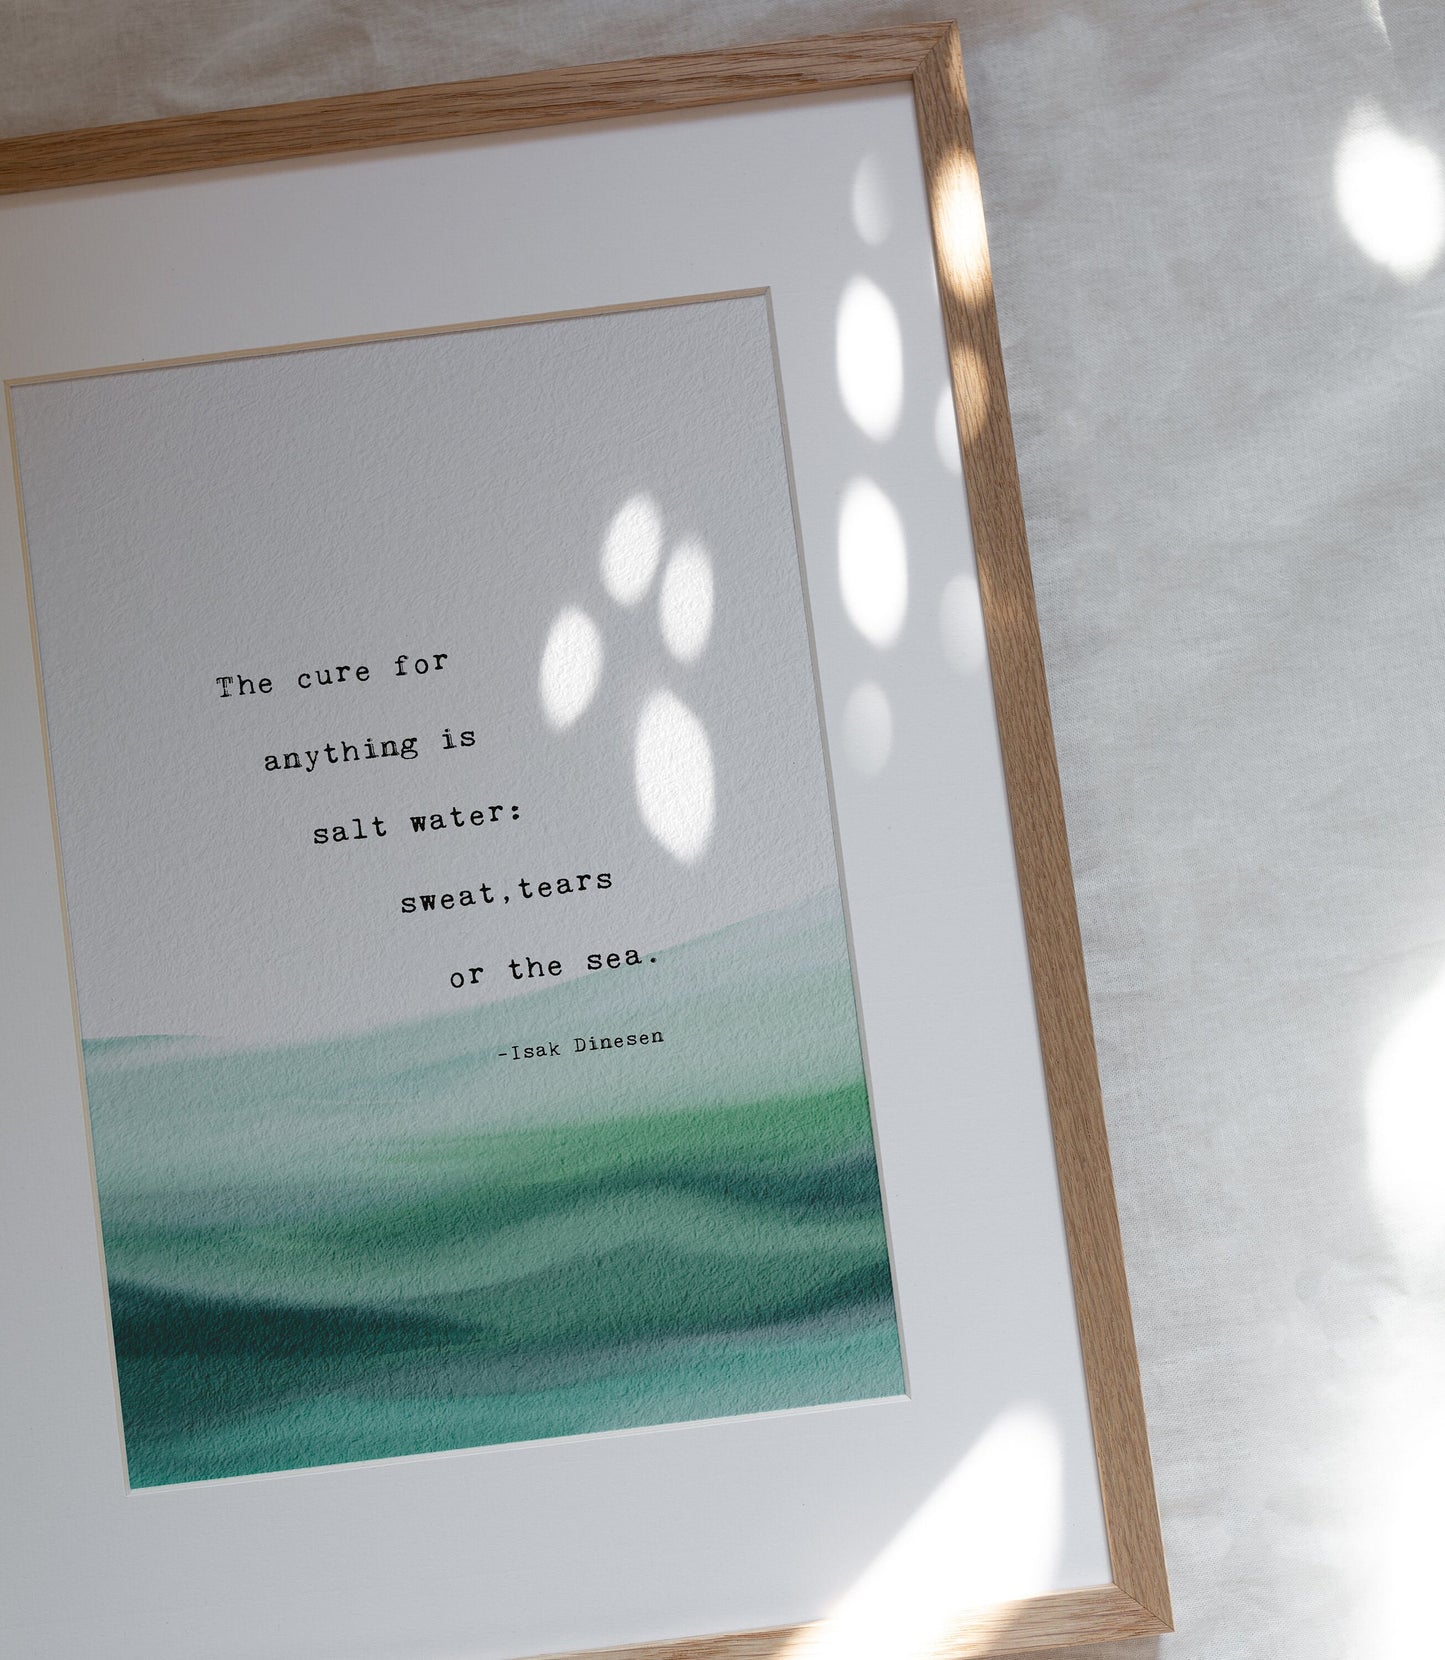 "The cure for anything is salt water" quote by Isak Dinesen. Watercolor wall art.